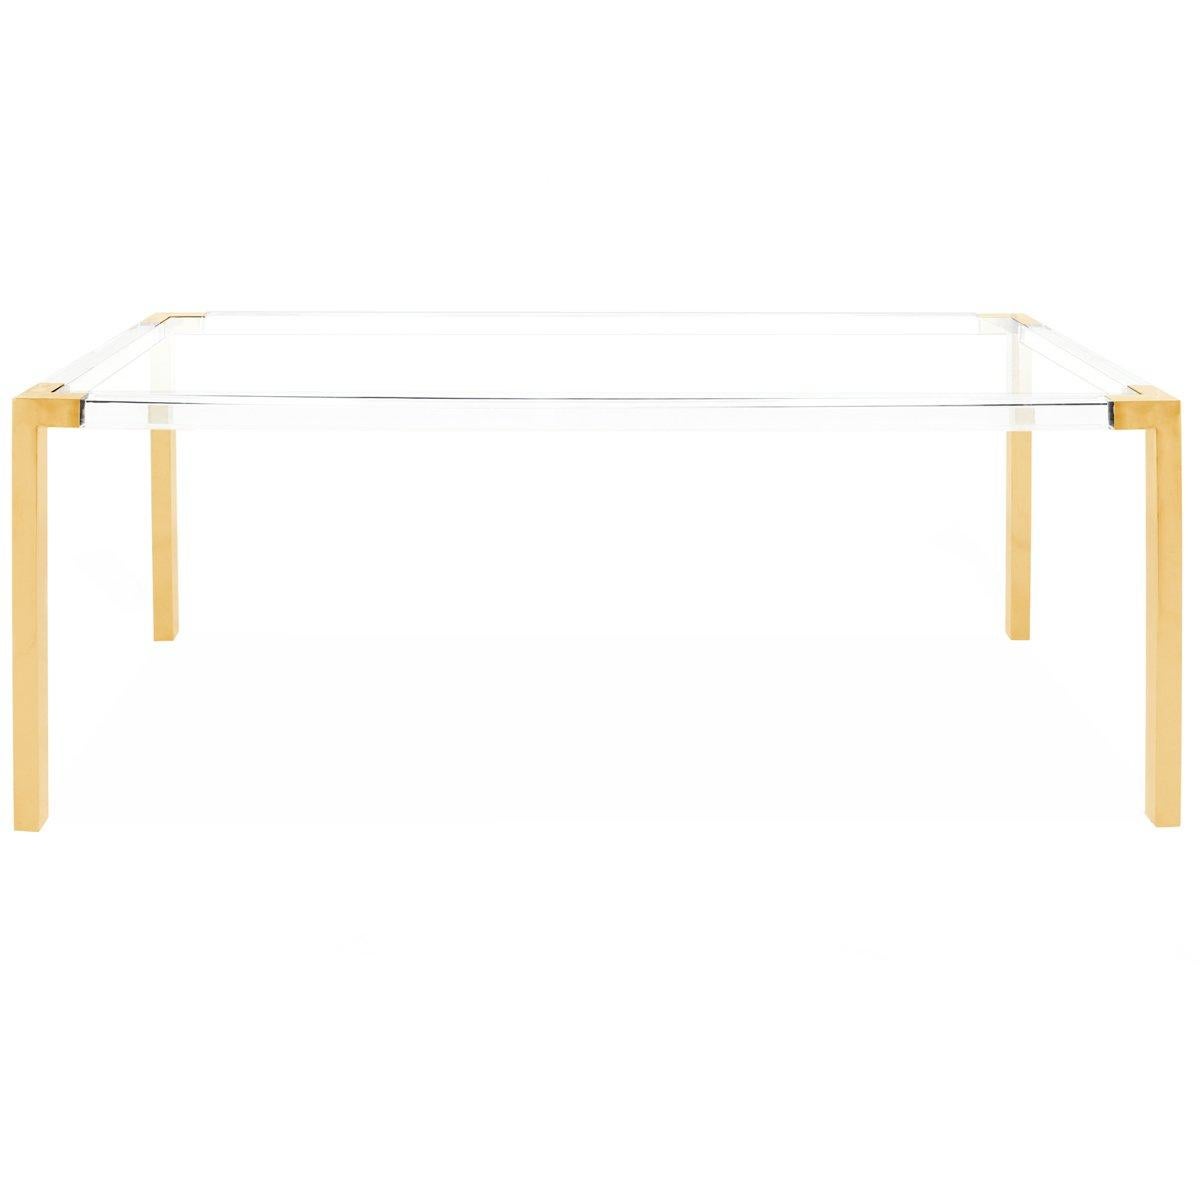 This dining table is a show stopper! Featuring a Lucite frame with shiny brass detail on legs and a glass inset top. Can also be used as a desk.
Measures: 84